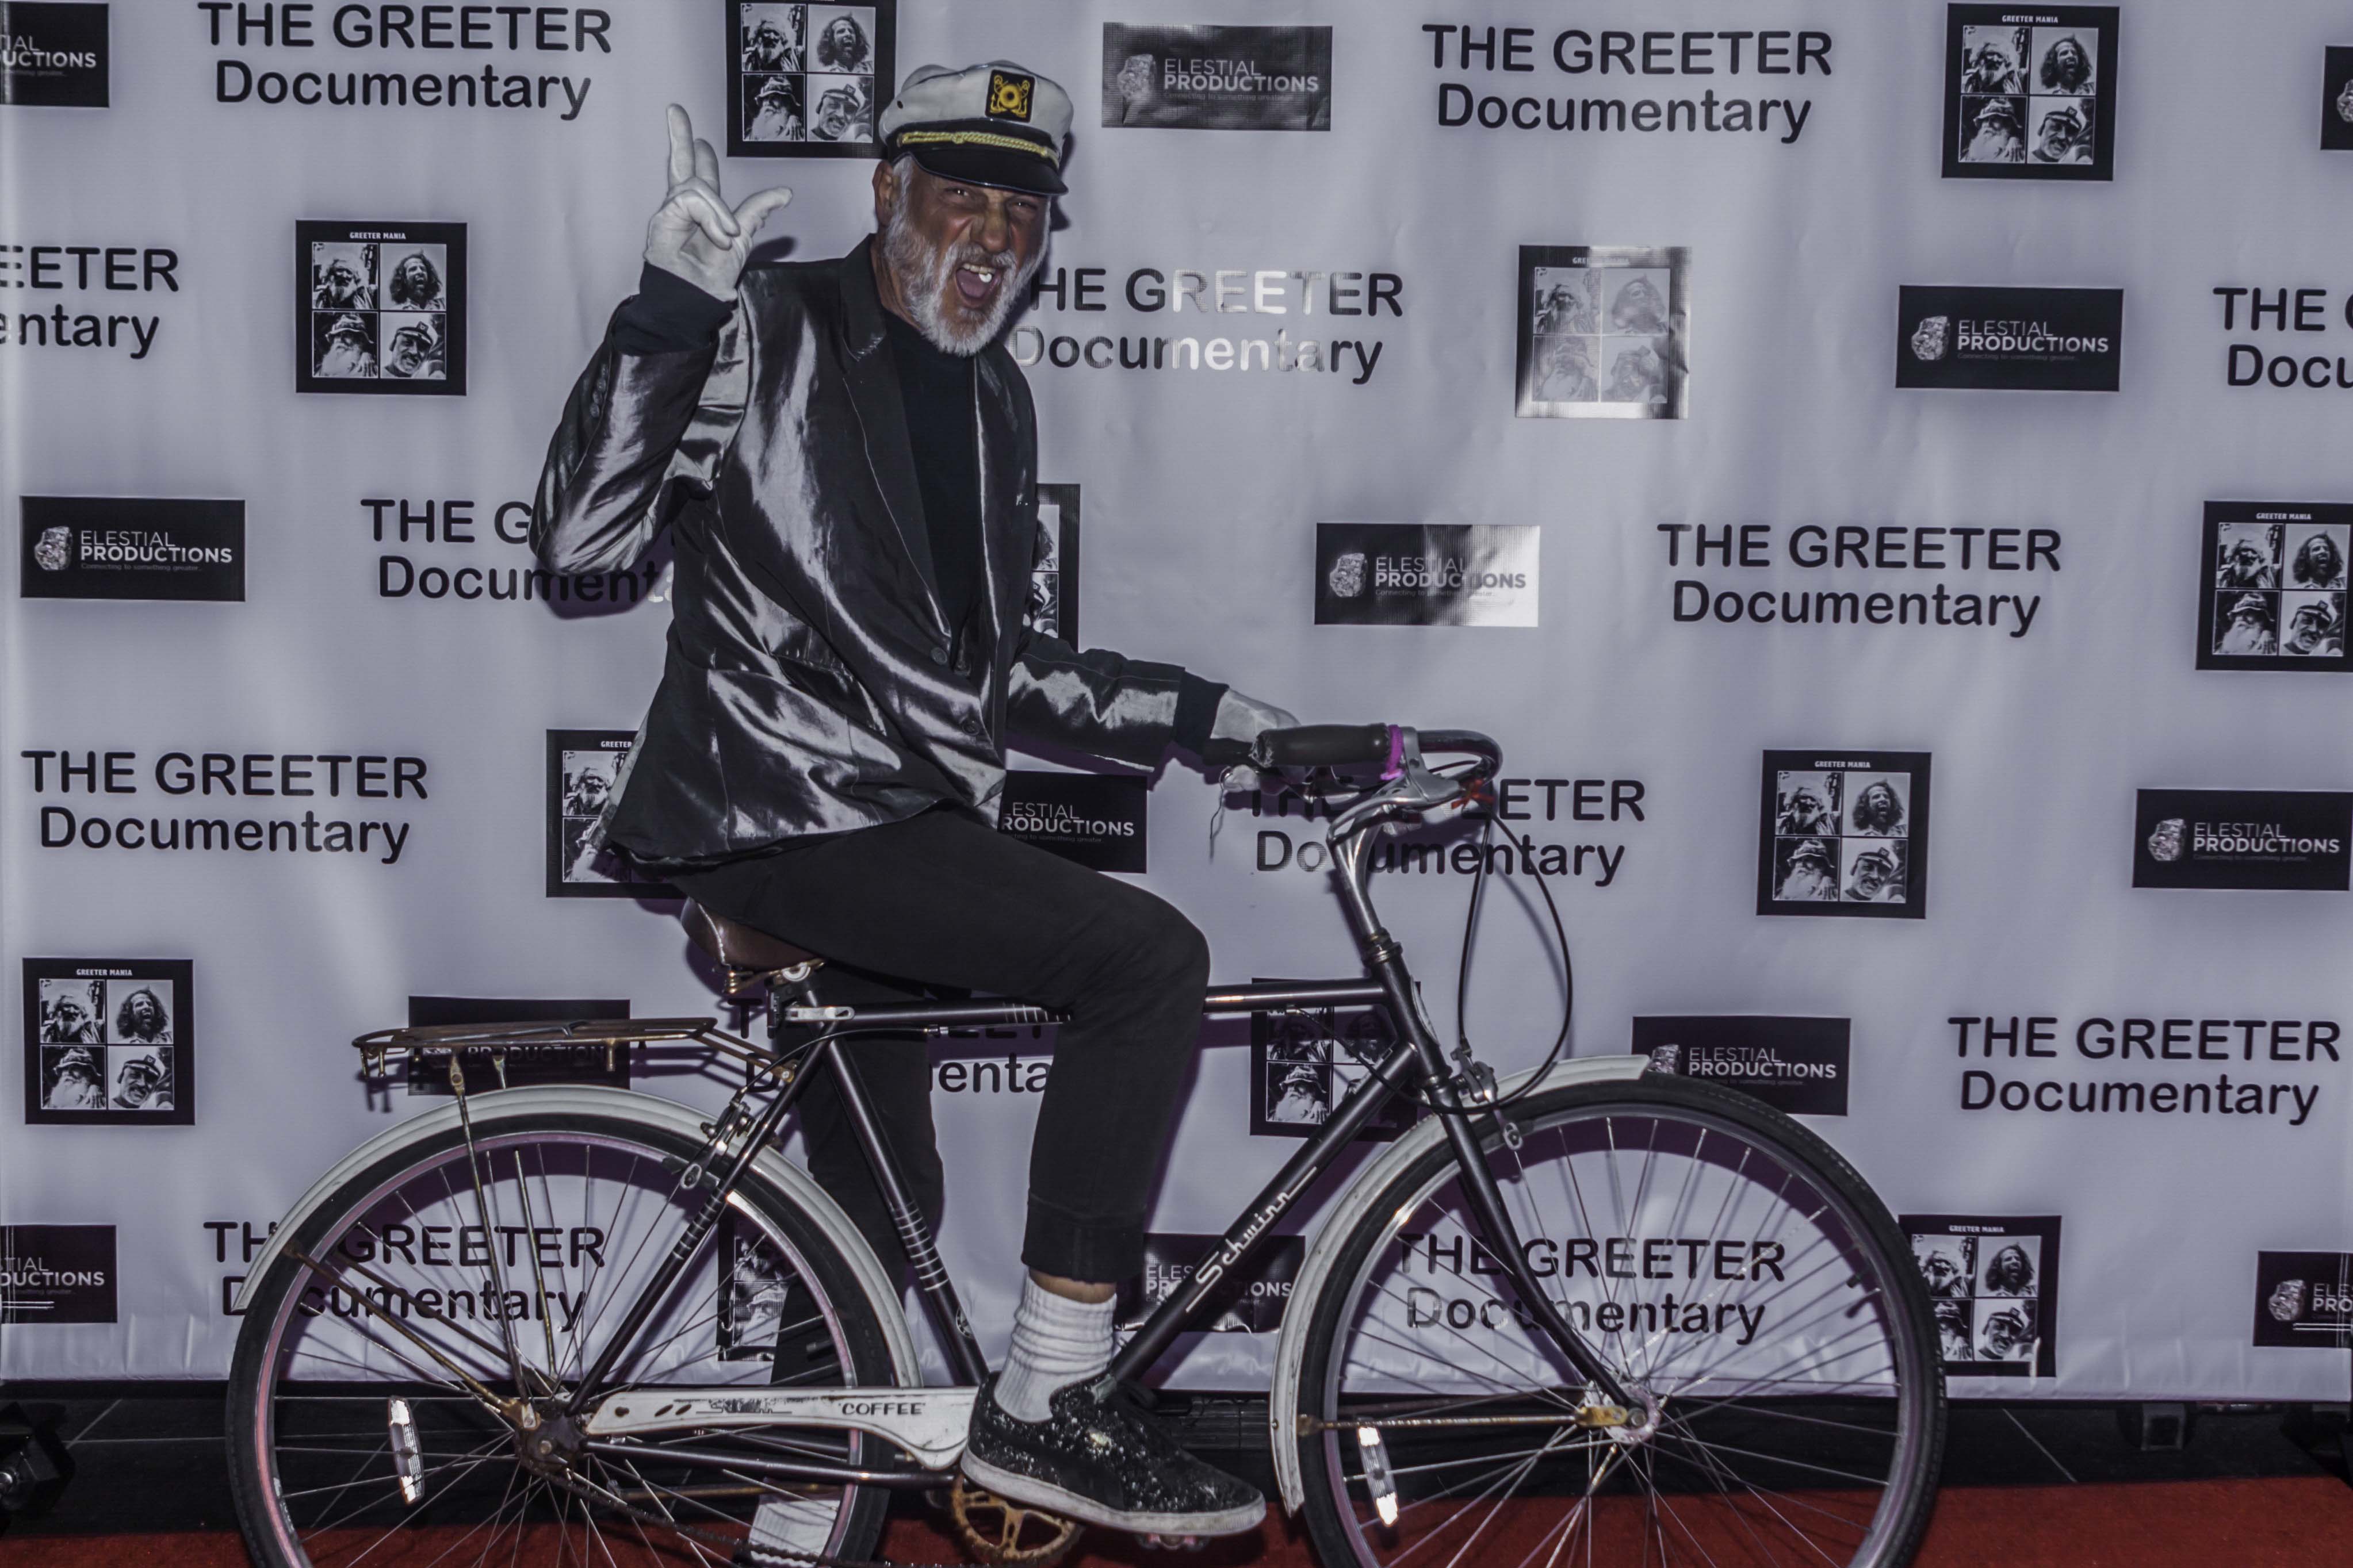 Michael Minutoli at “Greeter Documentary” premiere last month. Photos by Mitch Ridder 